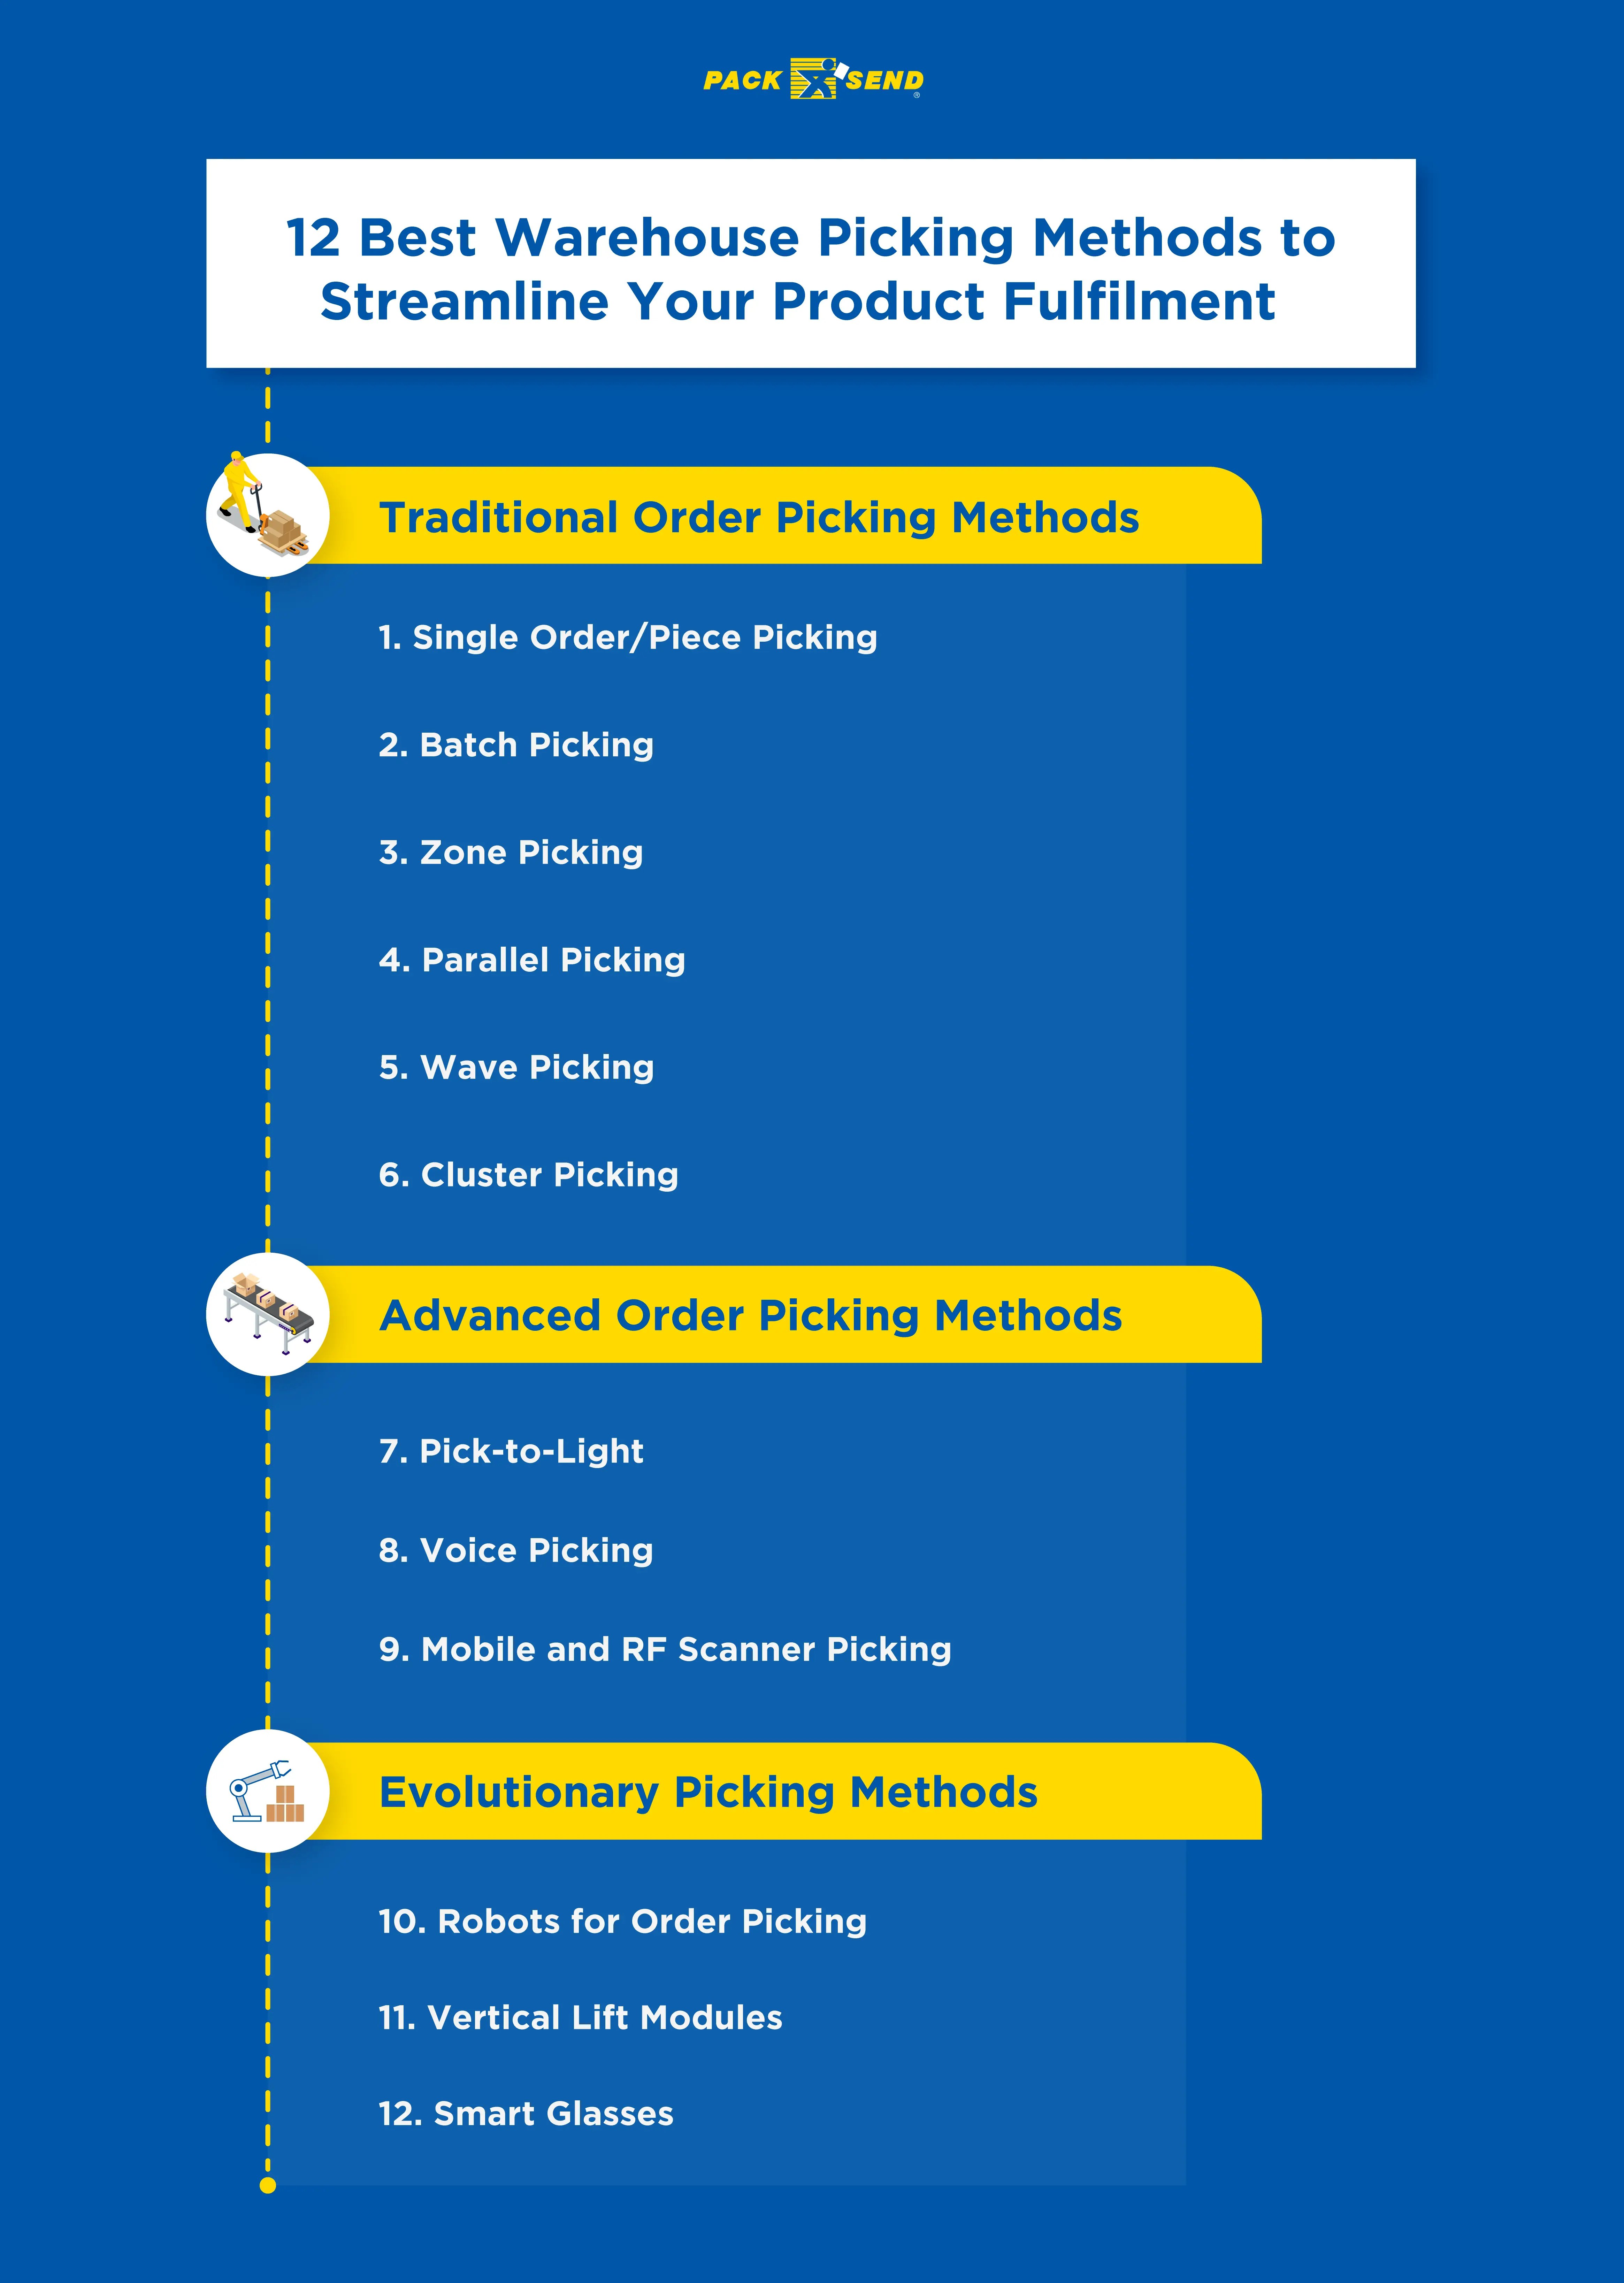 Best-Warehouse-Picking-Methods-to-Streamline-Your-Product-Fulfilment